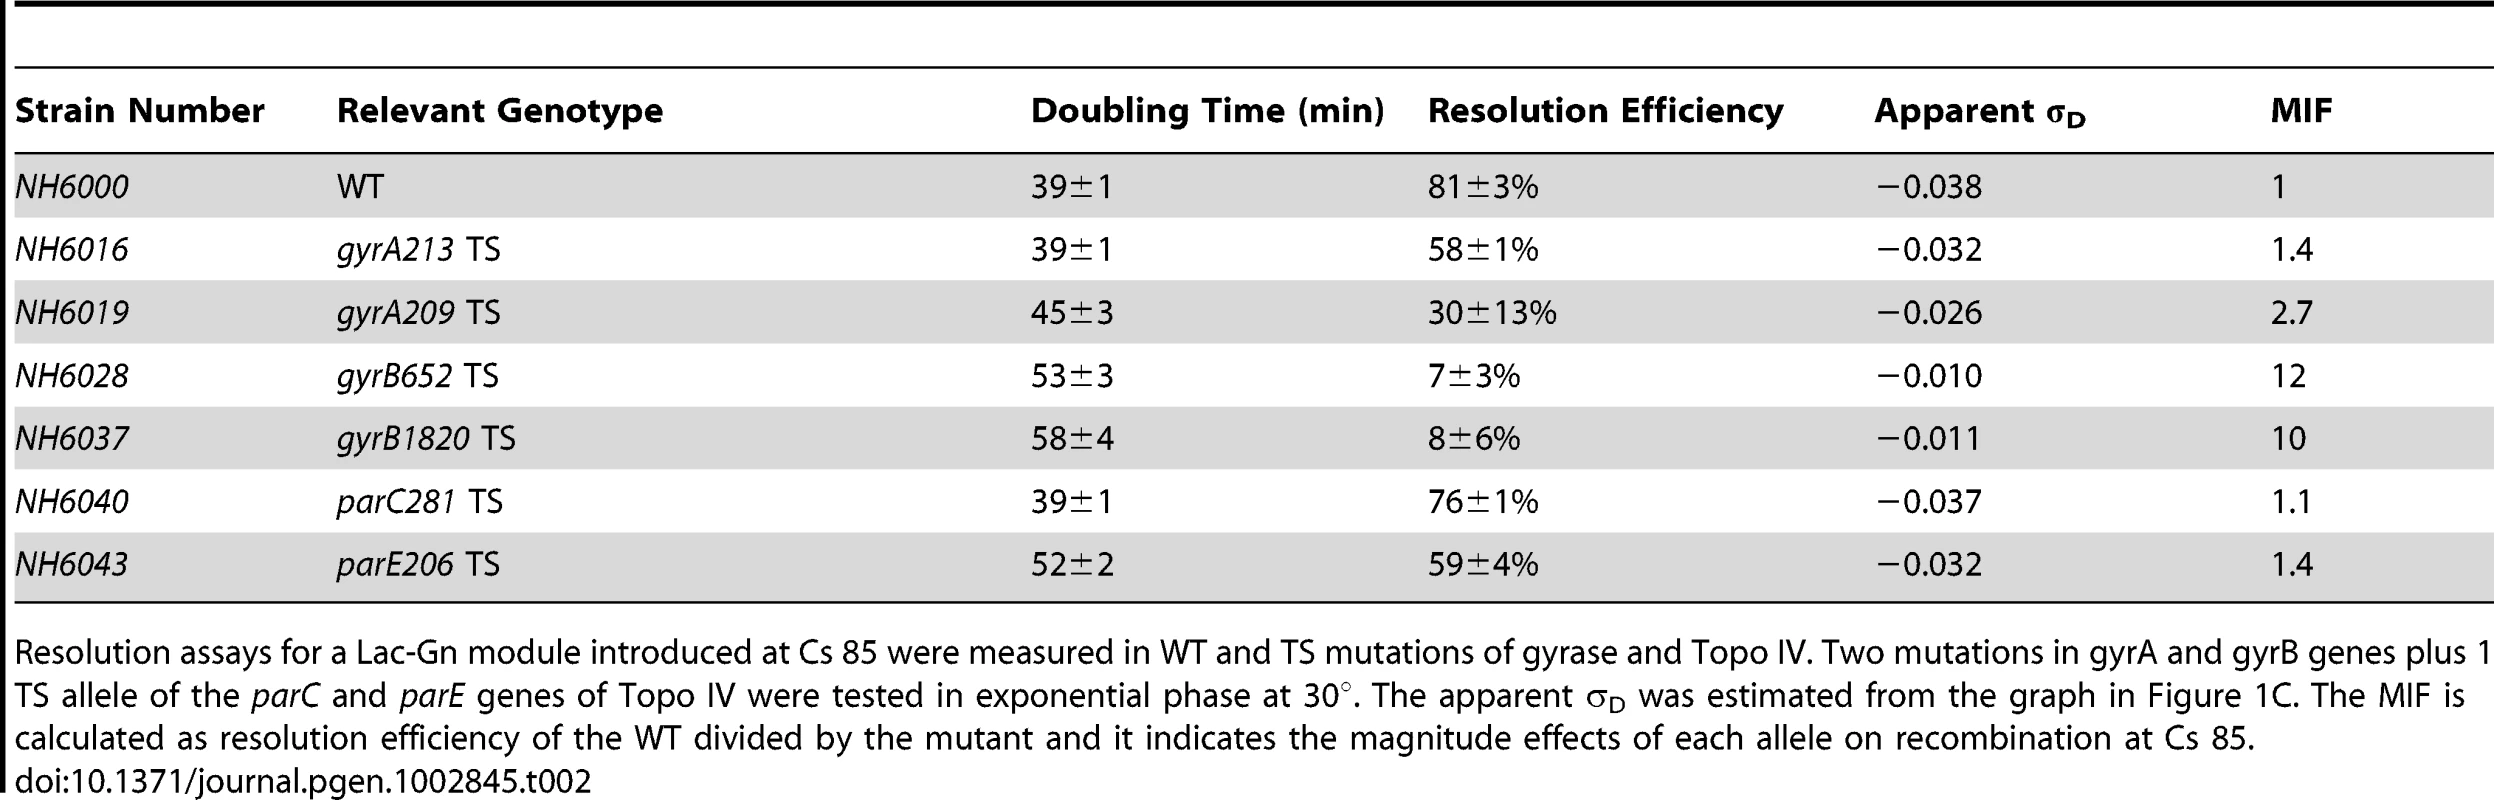 TS alleles of gyrase and Topo IV decrease diffusible chromosome supercoiling at Cs 85.